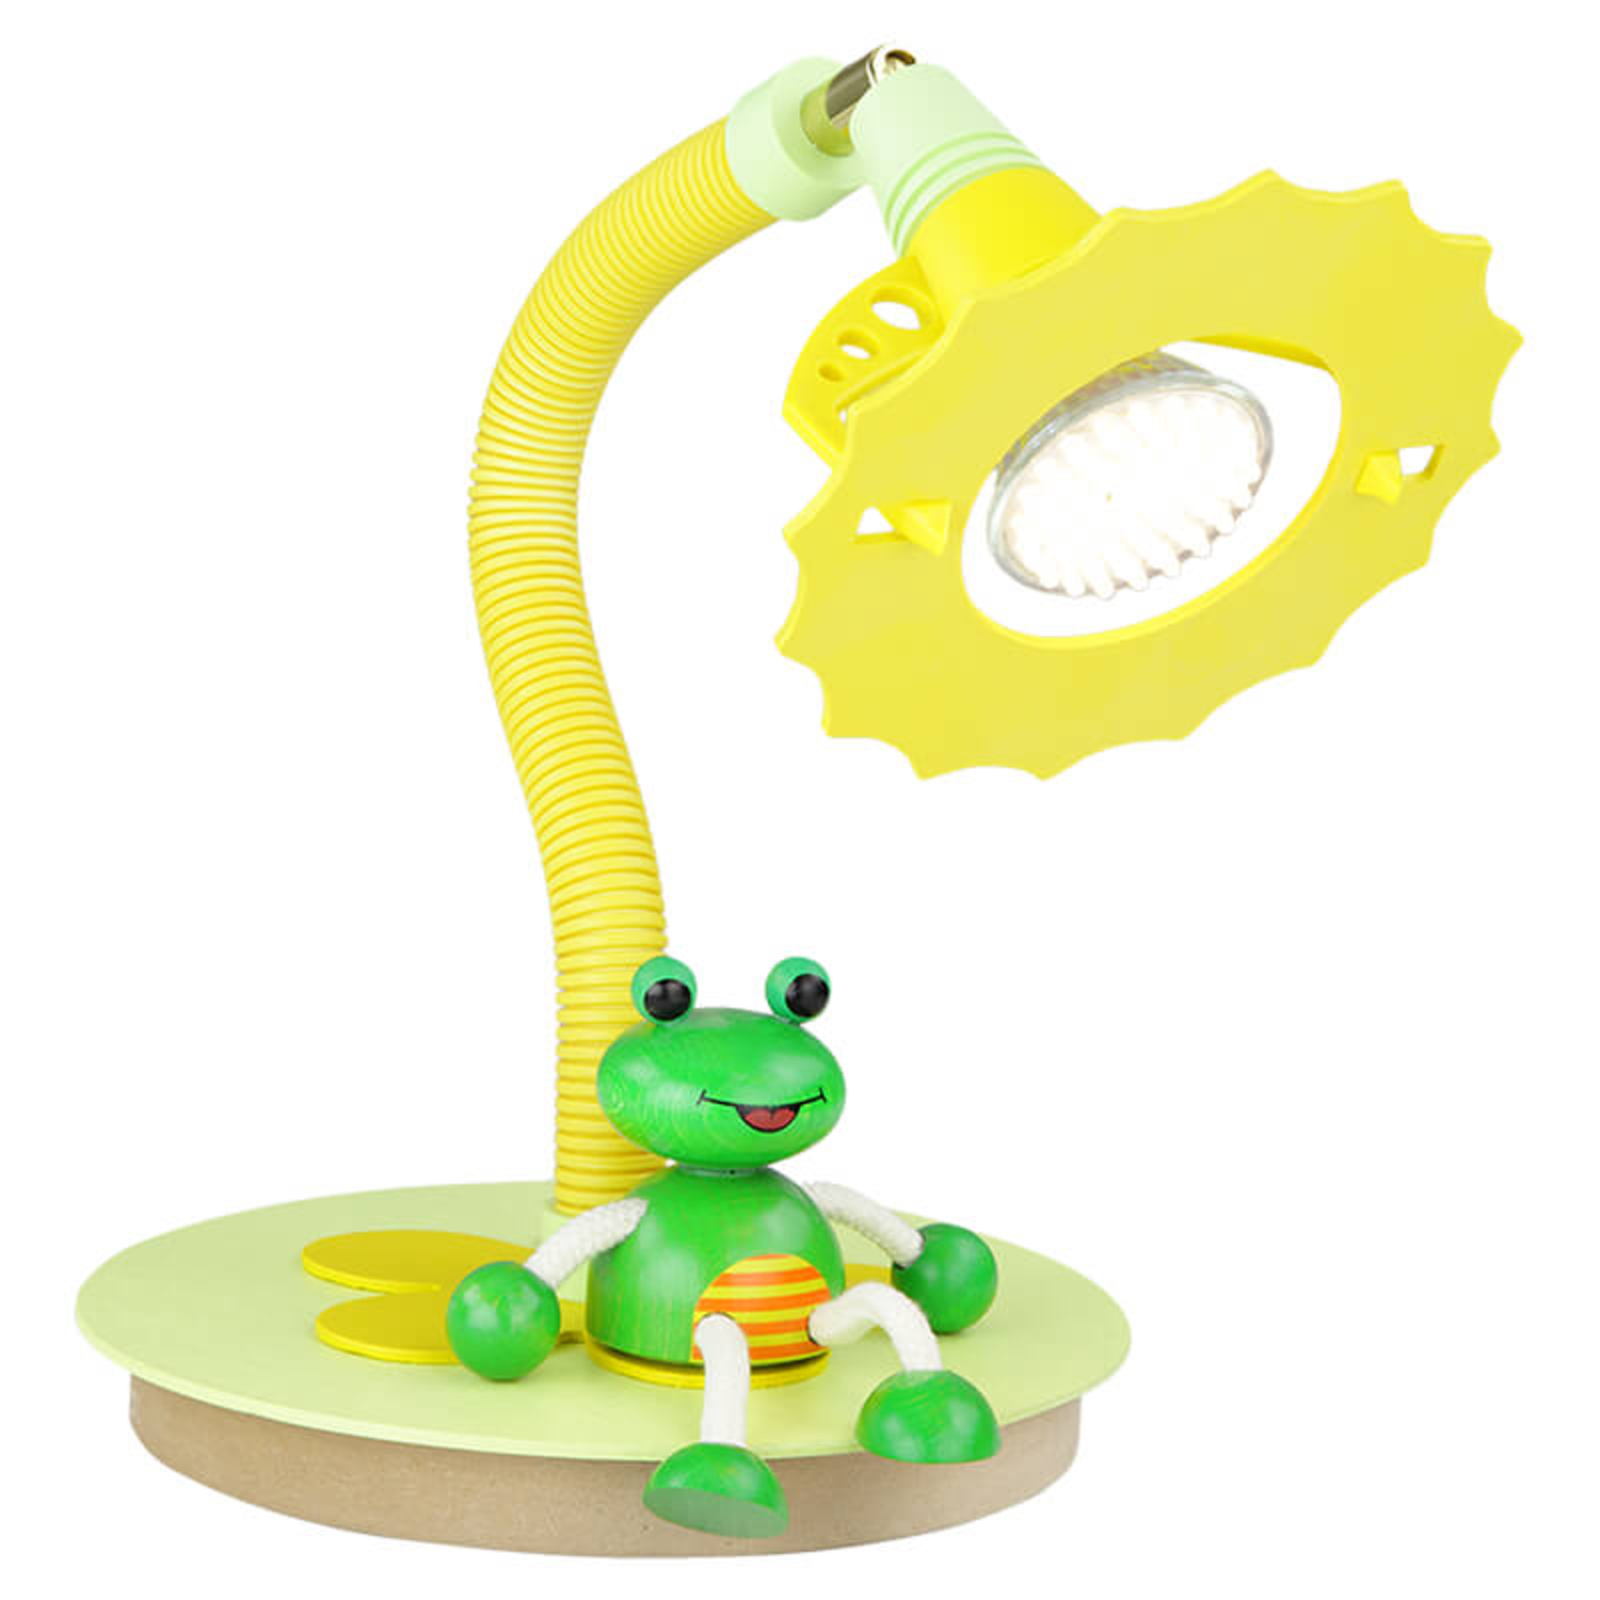 Frog LED table lamp for a child’s room